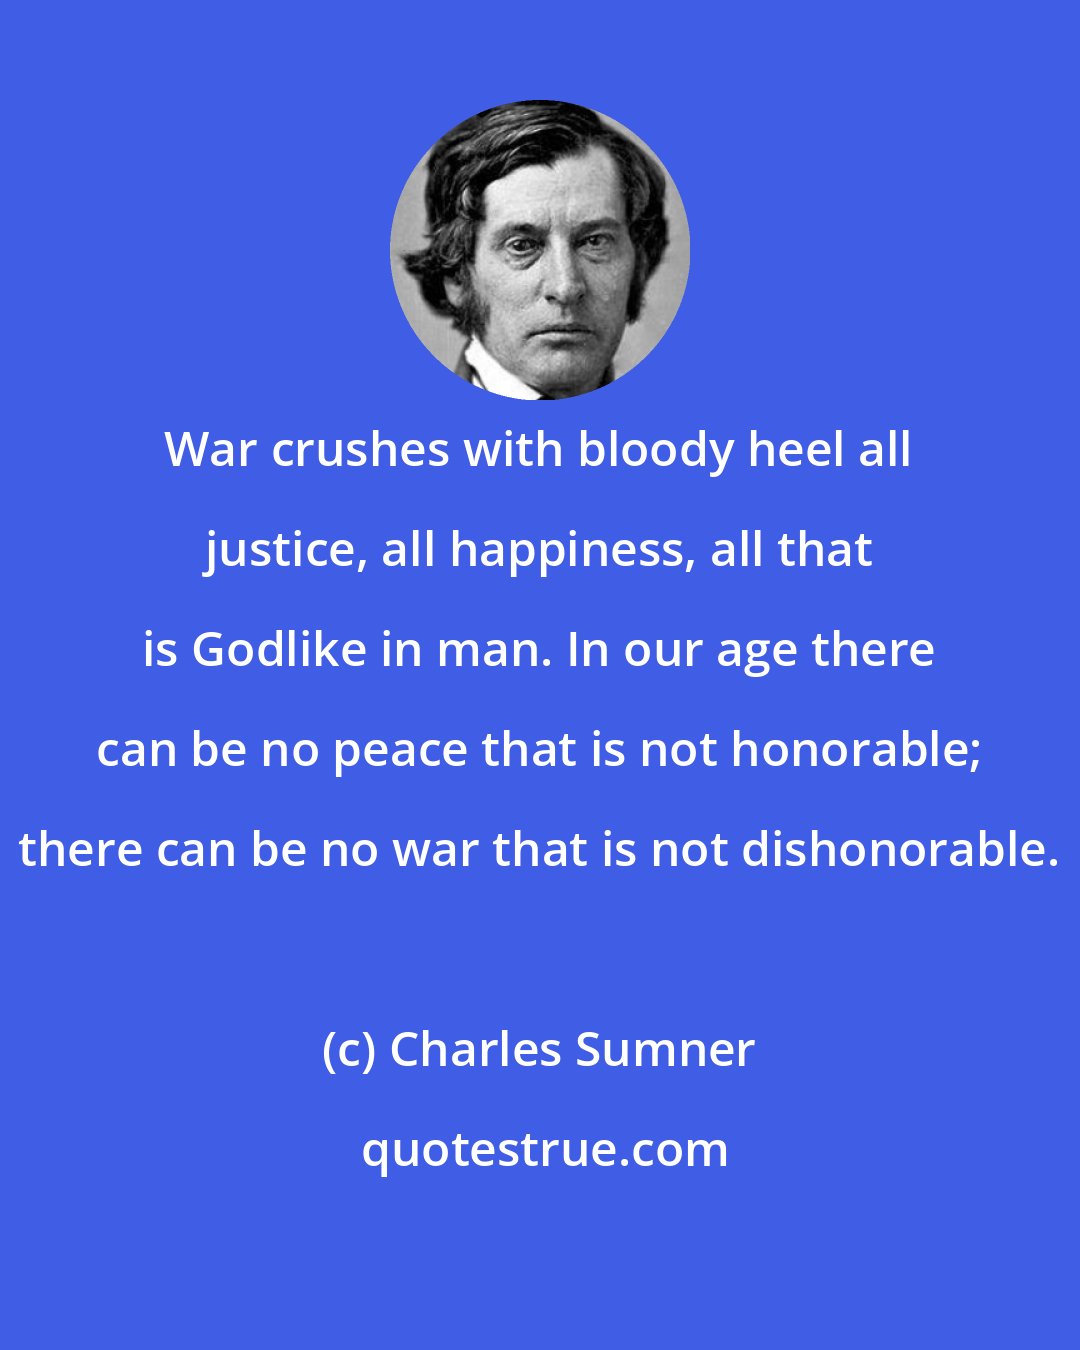 Charles Sumner: War crushes with bloody heel all justice, all happiness, all that is Godlike in man. In our age there can be no peace that is not honorable; there can be no war that is not dishonorable.